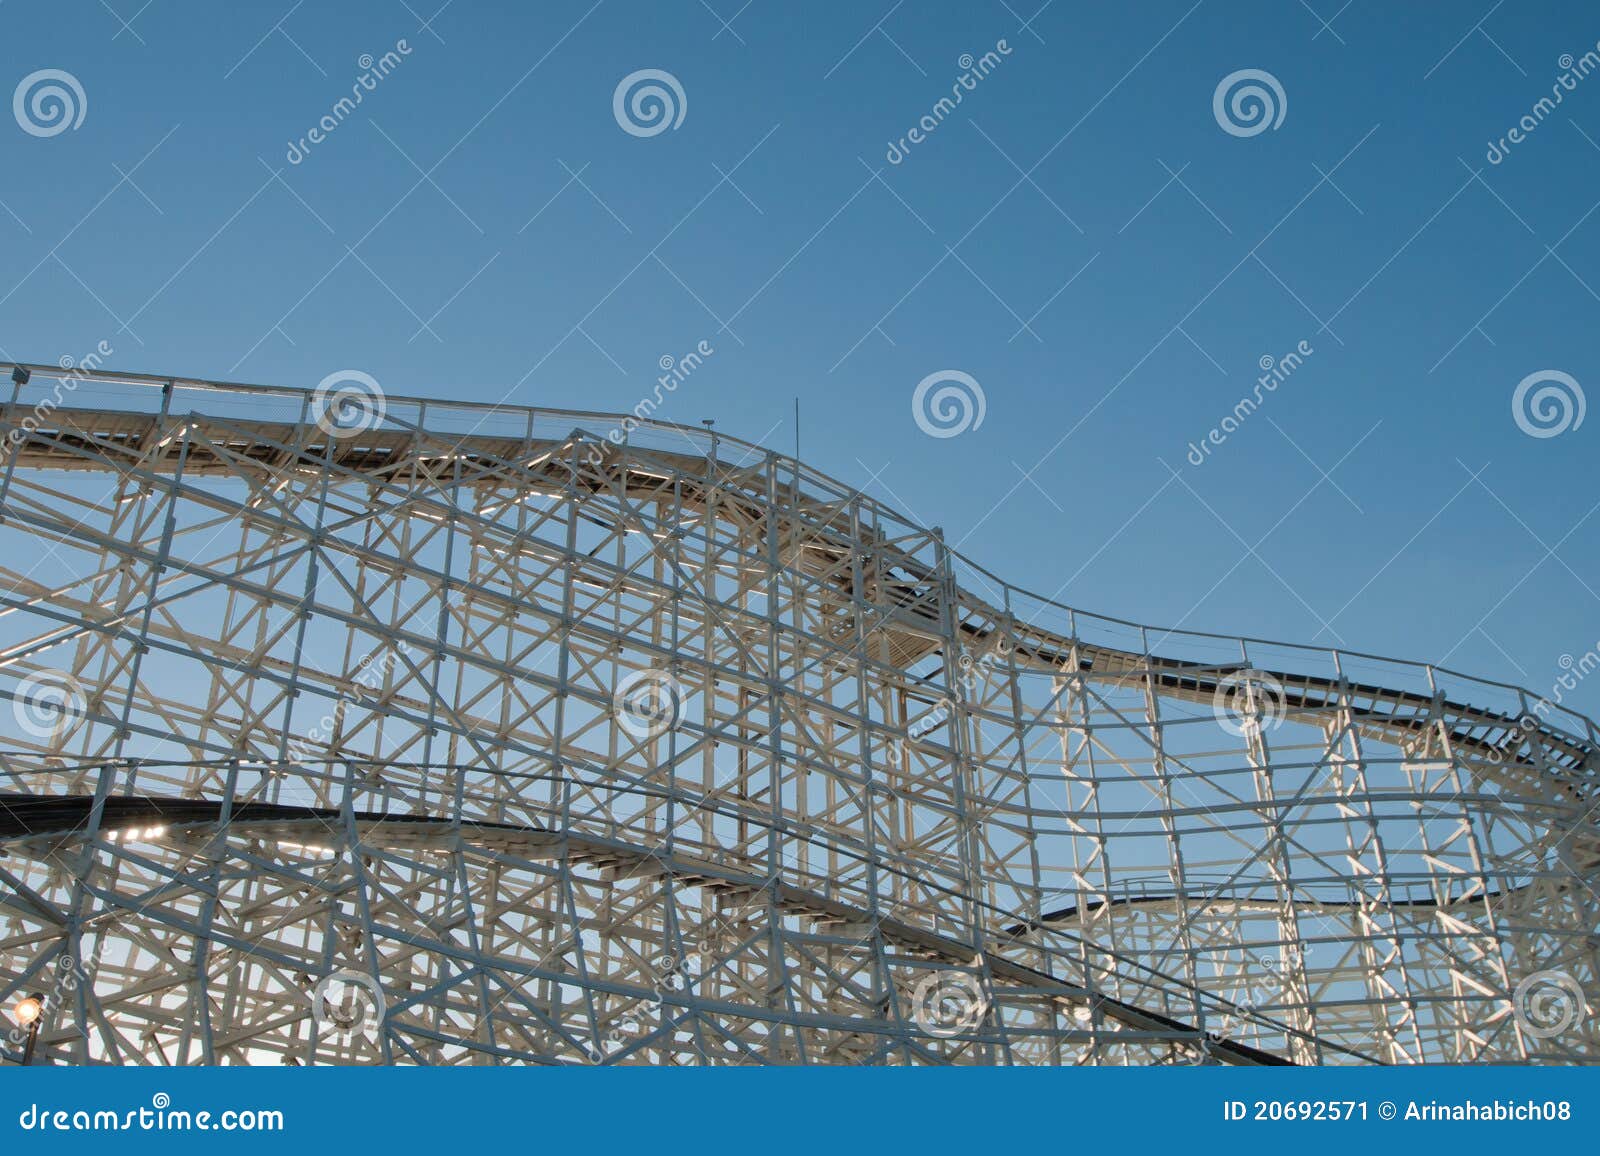 Old Rollercoaster Stock Image Image Of Rollercoaster 20692571